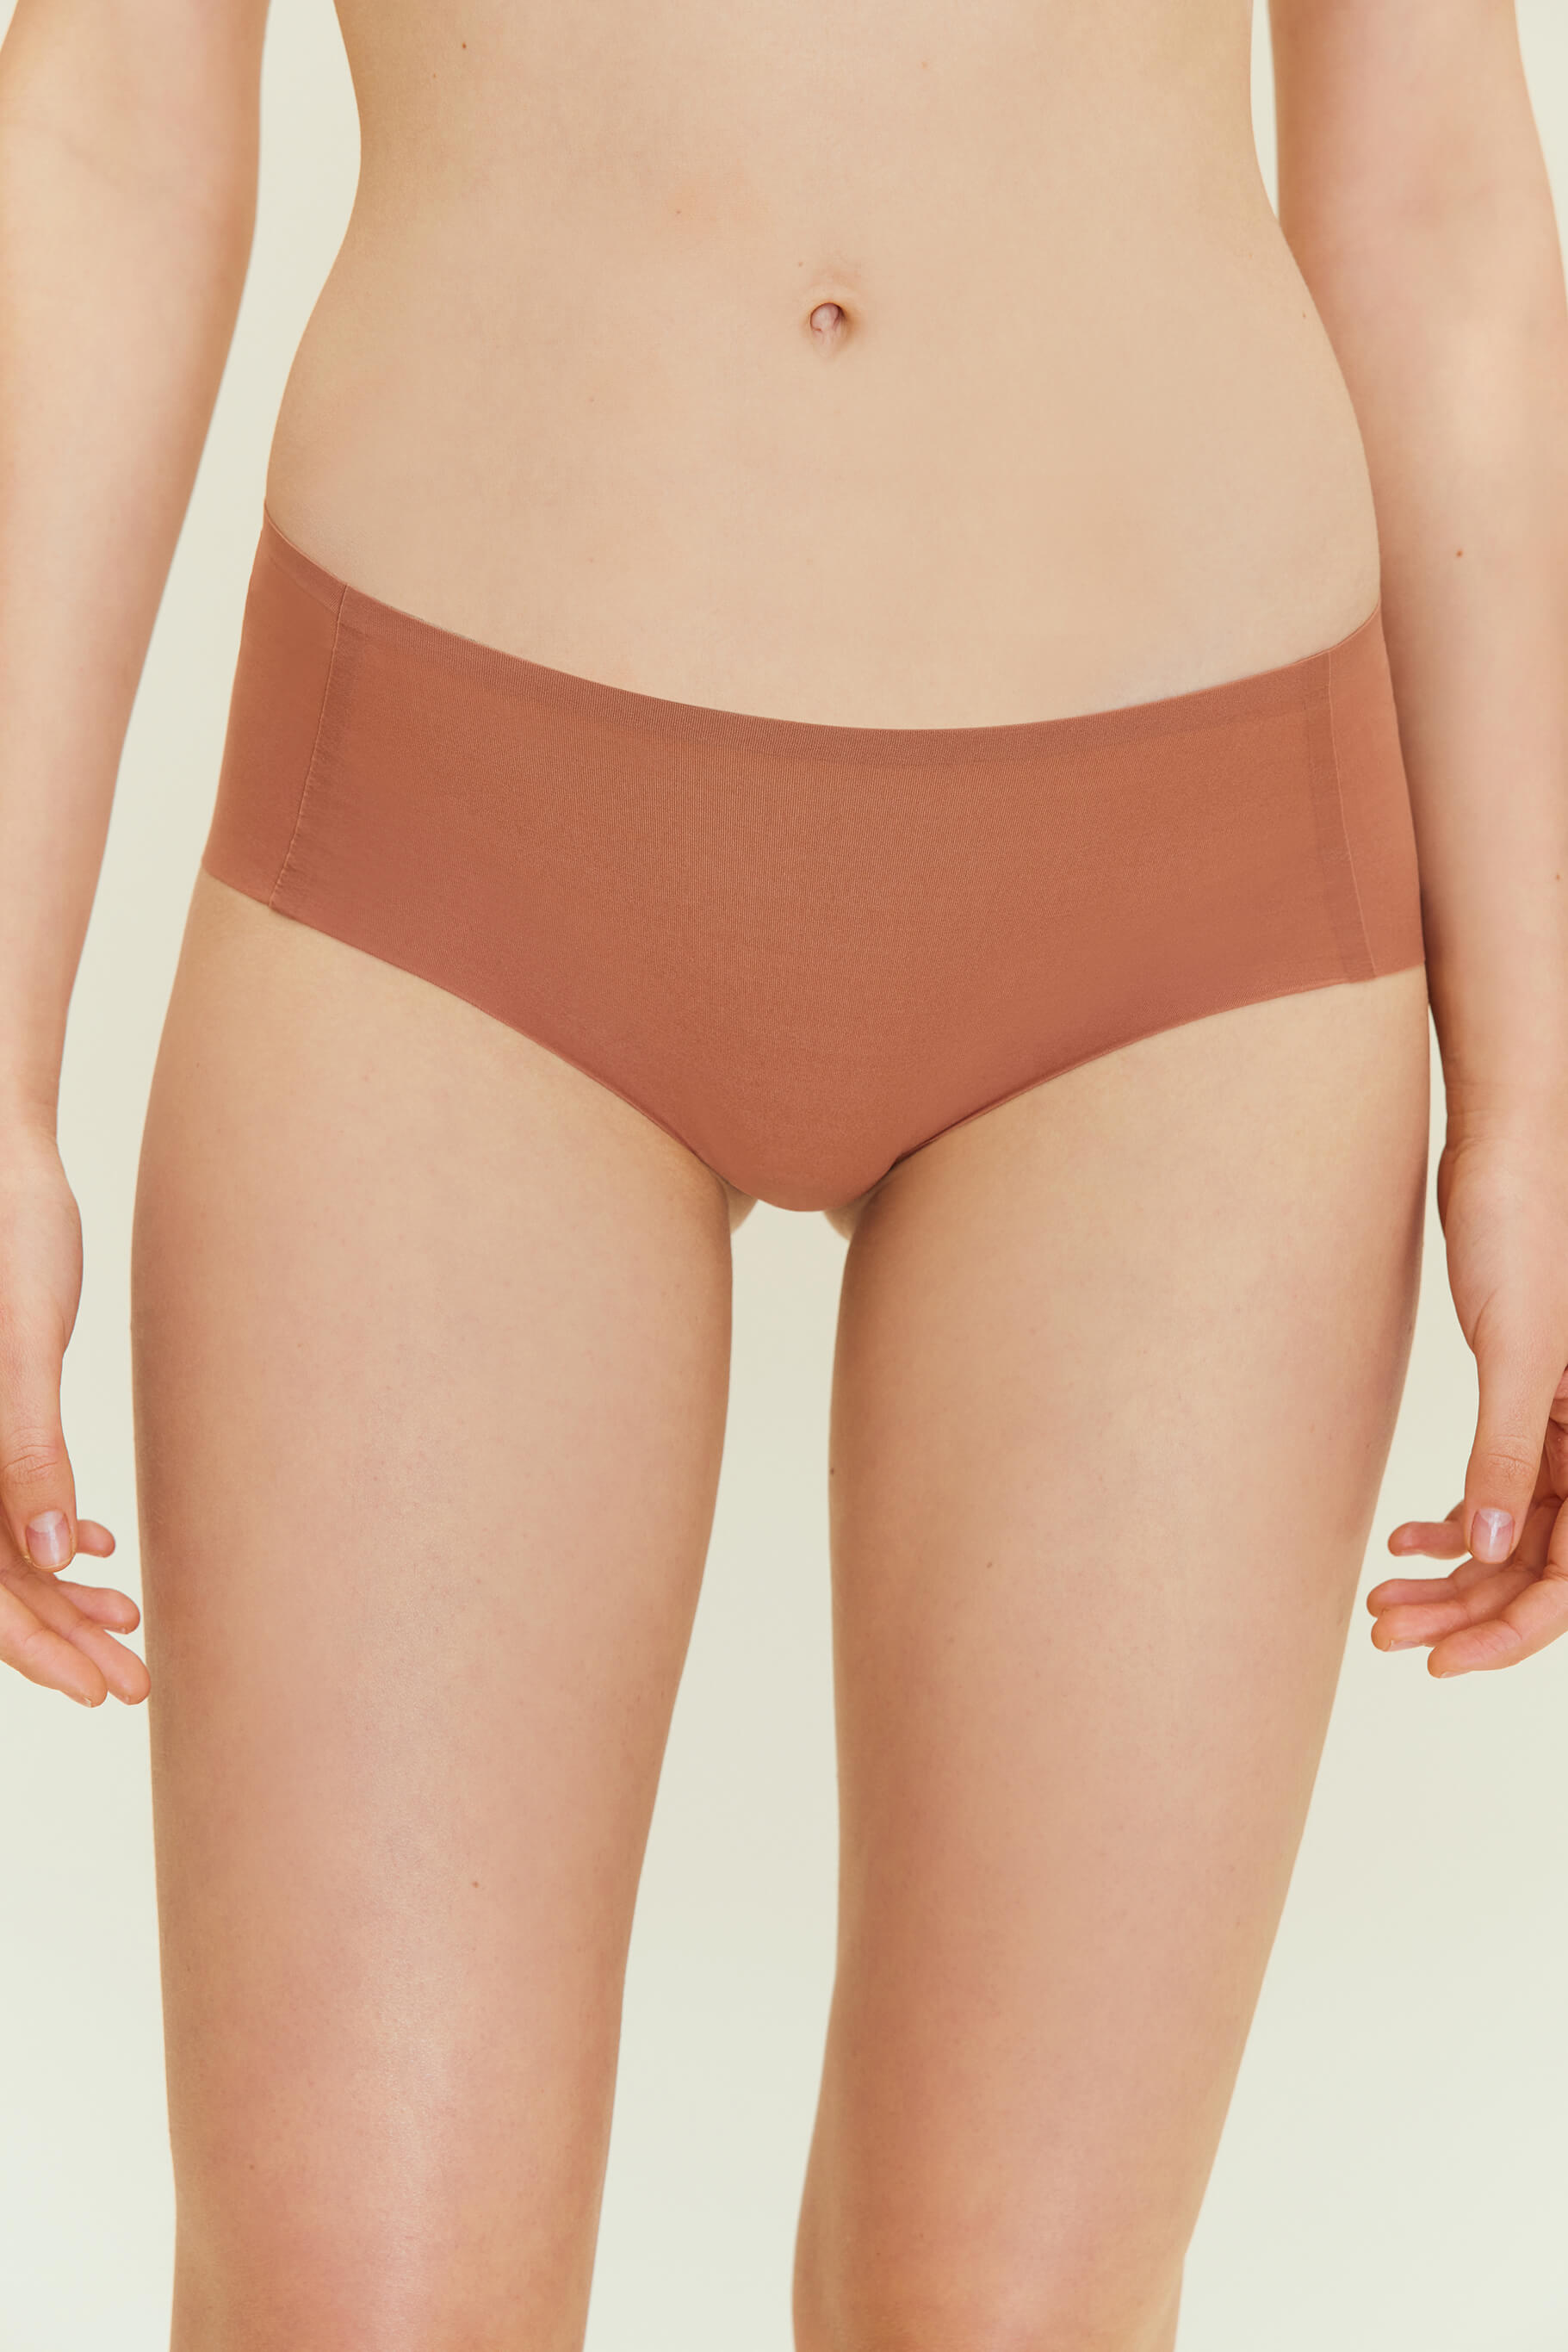 commando Women's Butter Hipster Briefs, Toffee, Tan, Brown, XS at   Women's Clothing store